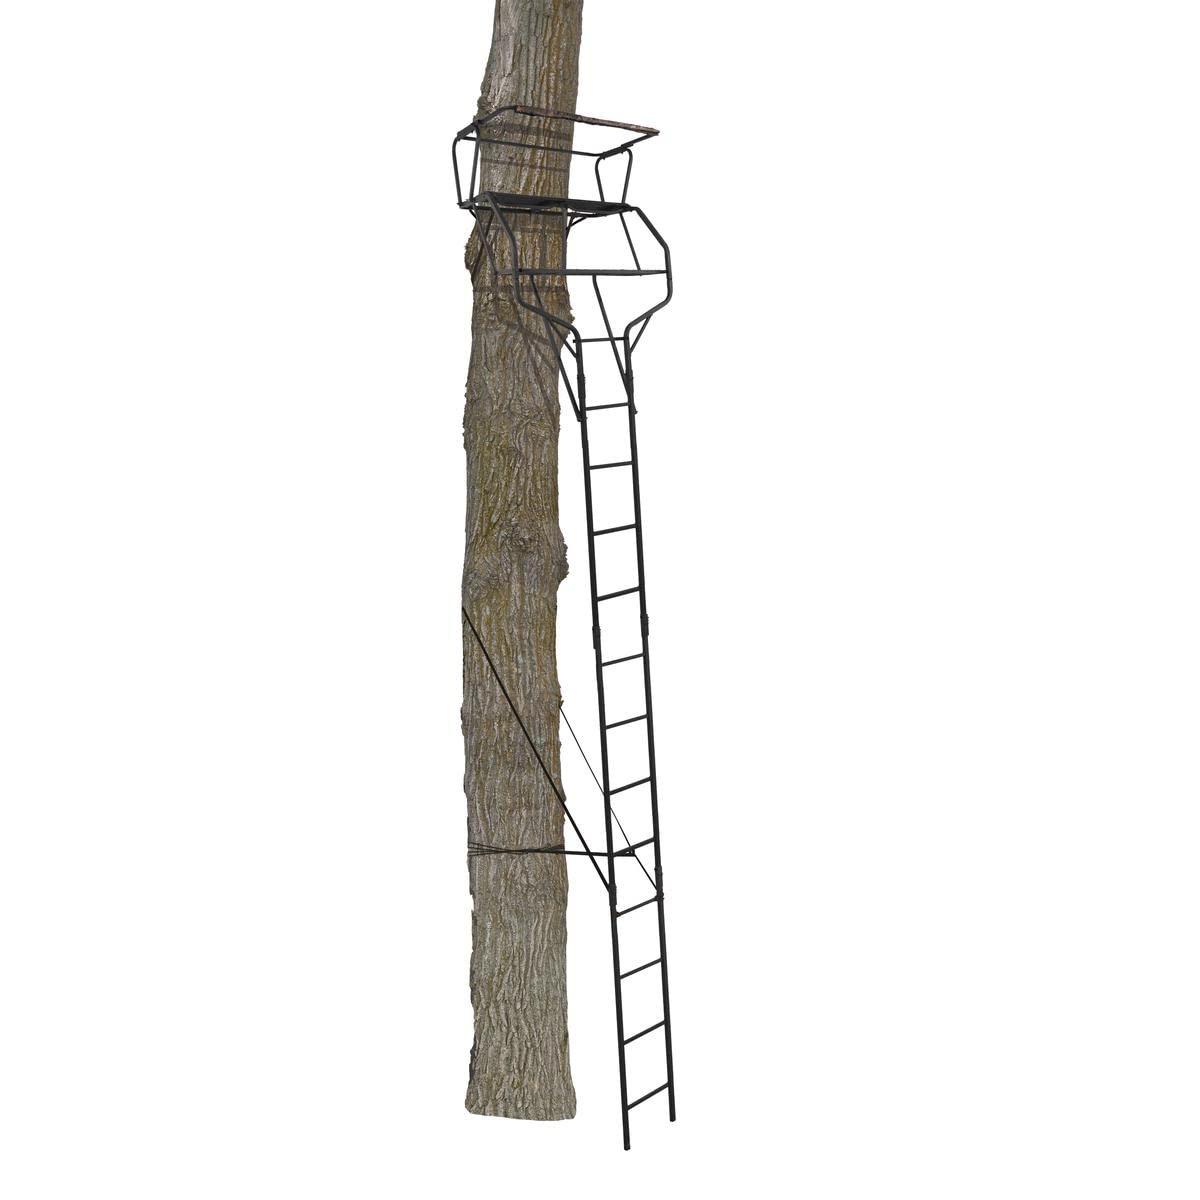 BIG GAME Guardian XLT 2-Person Ladder Whitetail Deer Elk Mule Above Hunting Outdoors Flex-Tek Seats 18' Tall Tree Stand, Camo/Bl